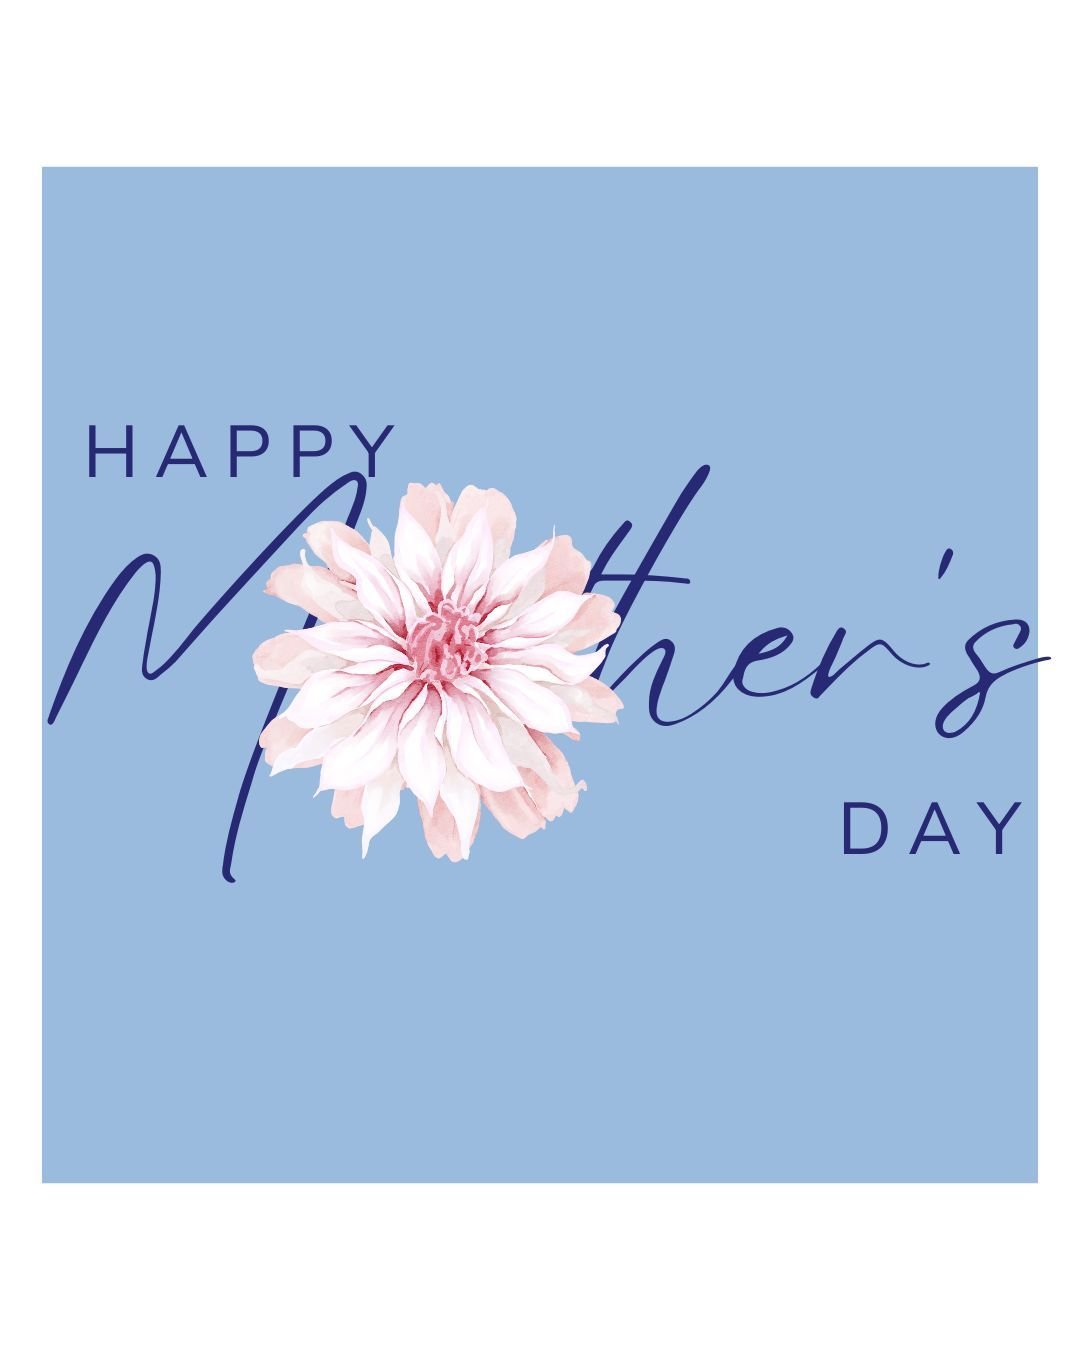 Happy Mother's Day to all the incredible moms out there! 🌸 Today, we celebrate the love, strength, and endless sacrifices you make. Wishing you a day filled with joy, laughter, and cherished moments. 💕
ㅤ
#HappyMothersDay #CelebratingMoms